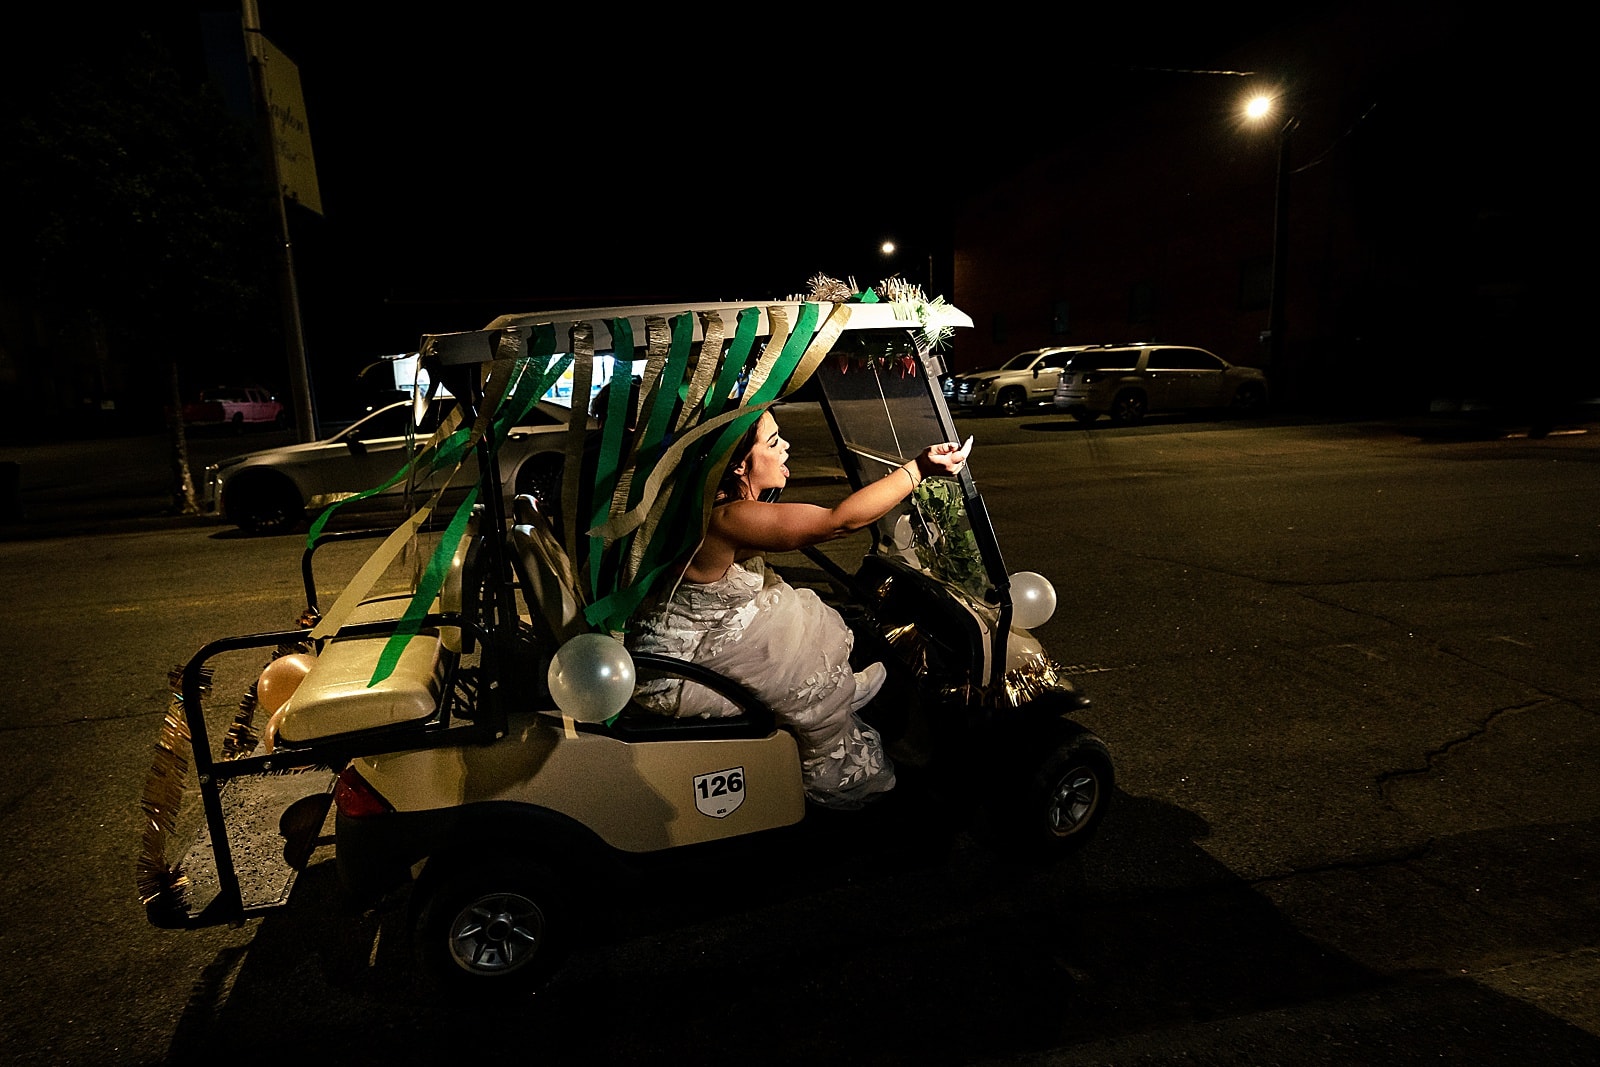 This couple made their wedding getaway in a golf-cart!!!